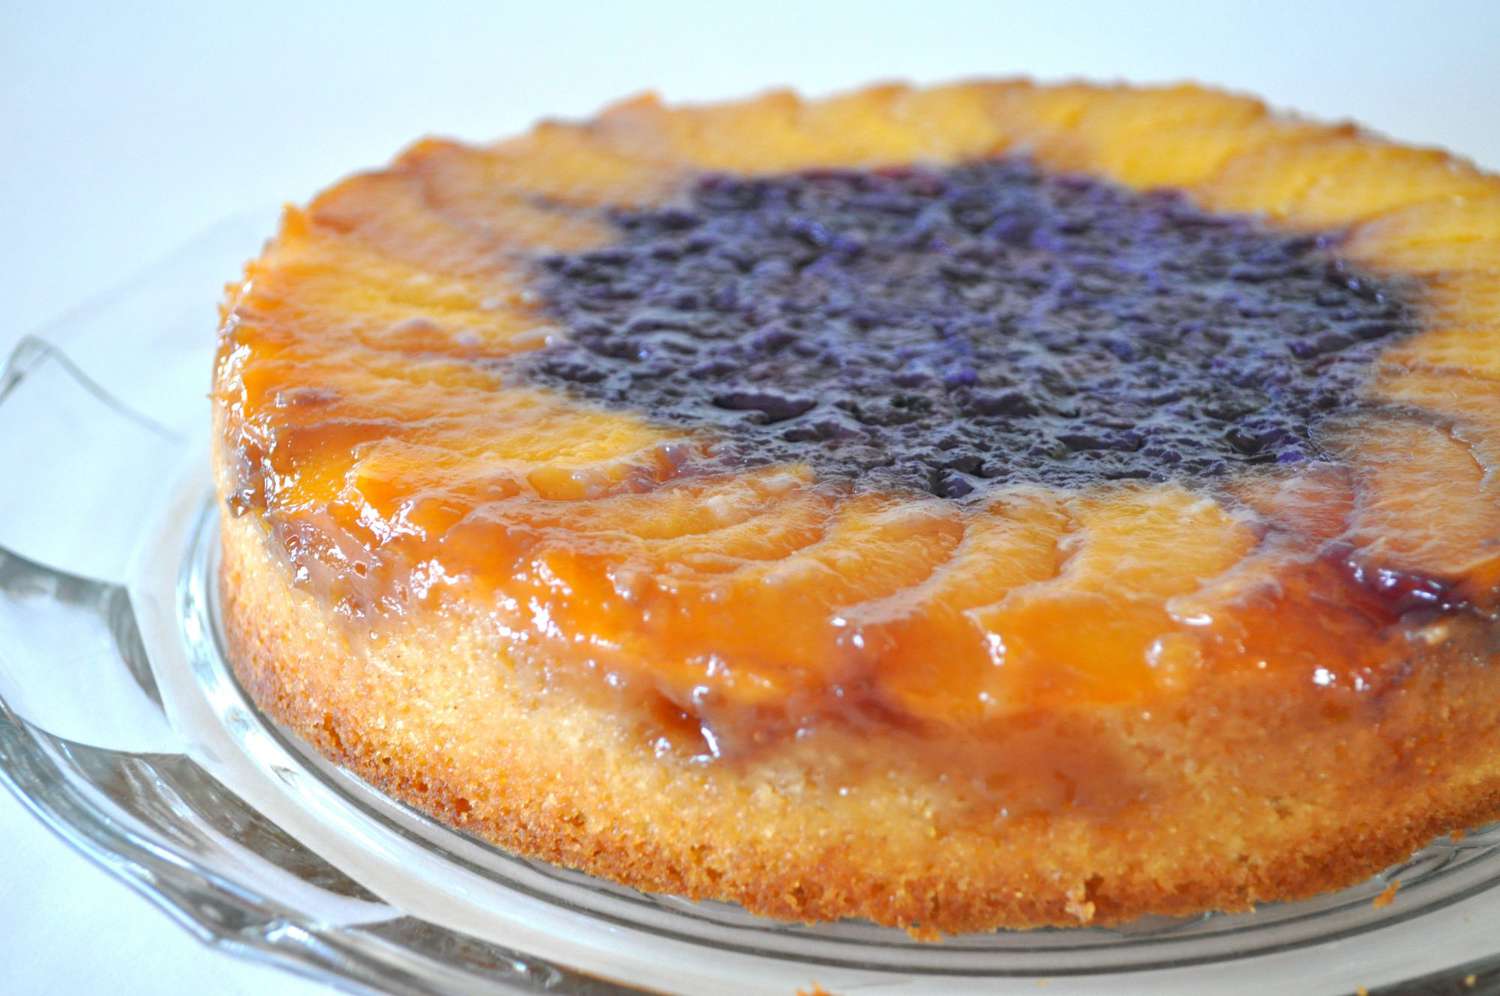 Sliced peaches around the outside, with blueberries in the center, this cake looks like a giant sunflower